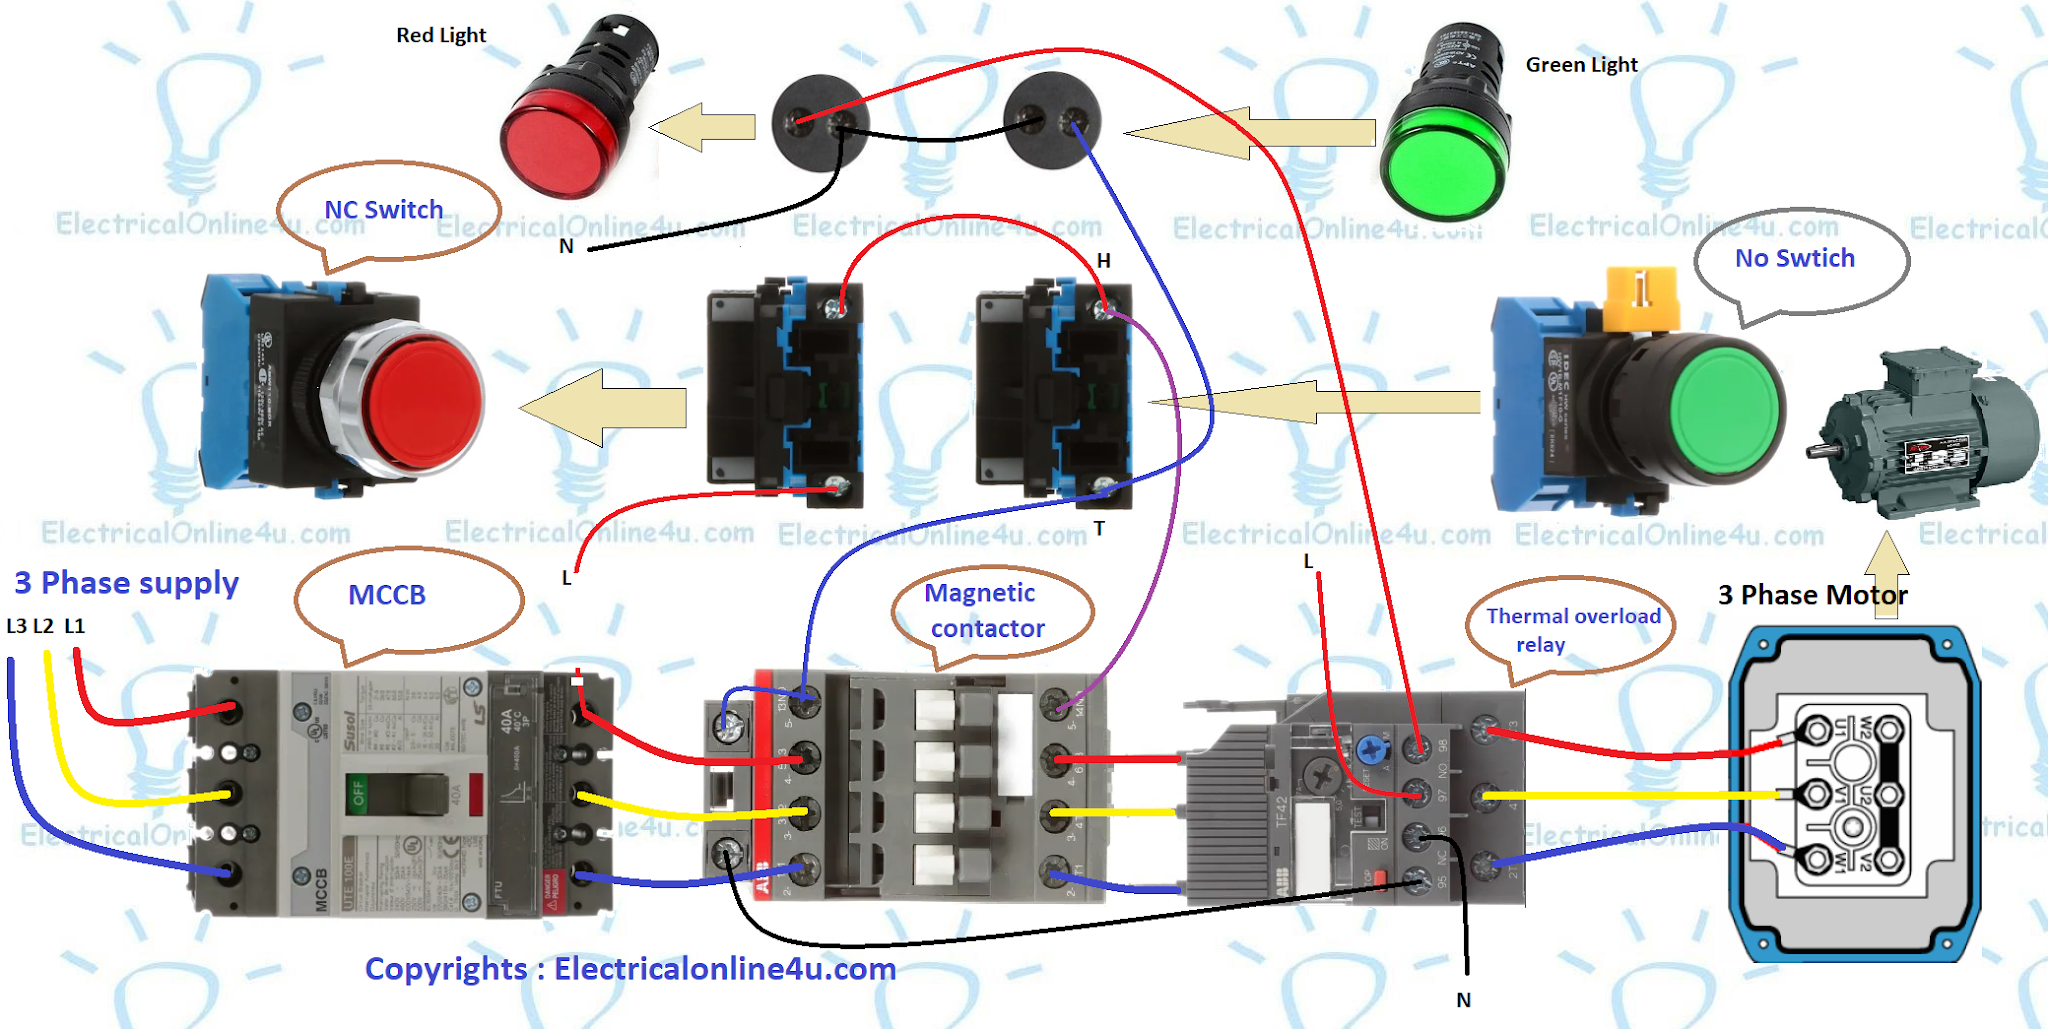 Contactor Wiring Diagram For 3 Phase Motor, Electrical Lighting Contactor Wiring Diagram